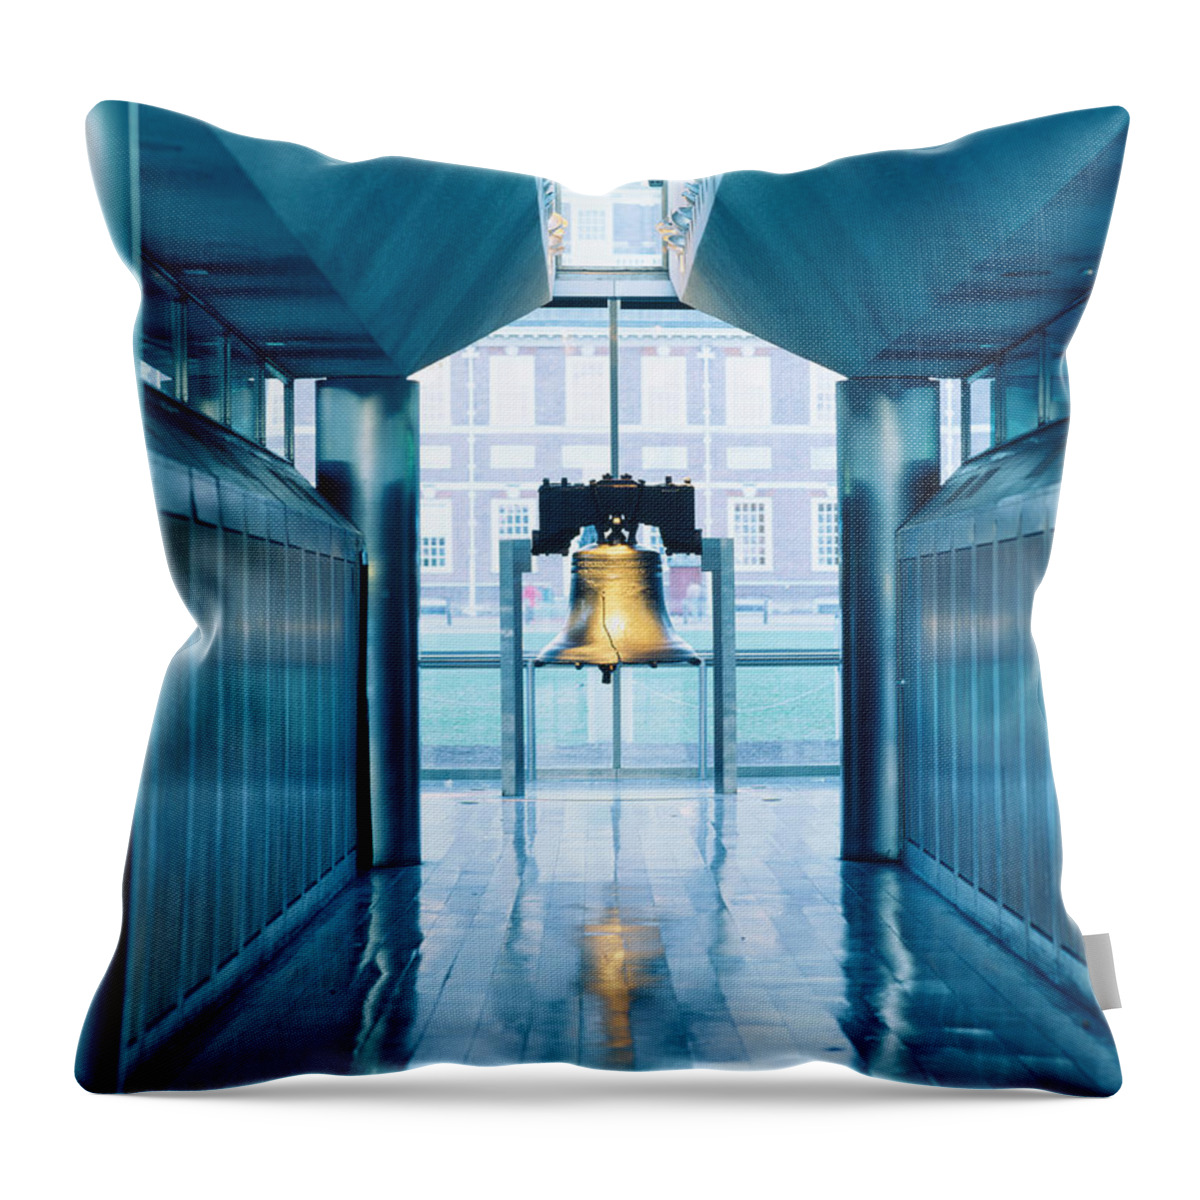 Photography Throw Pillow featuring the photograph Liberty Bell Hanging In A Corridor by Panoramic Images